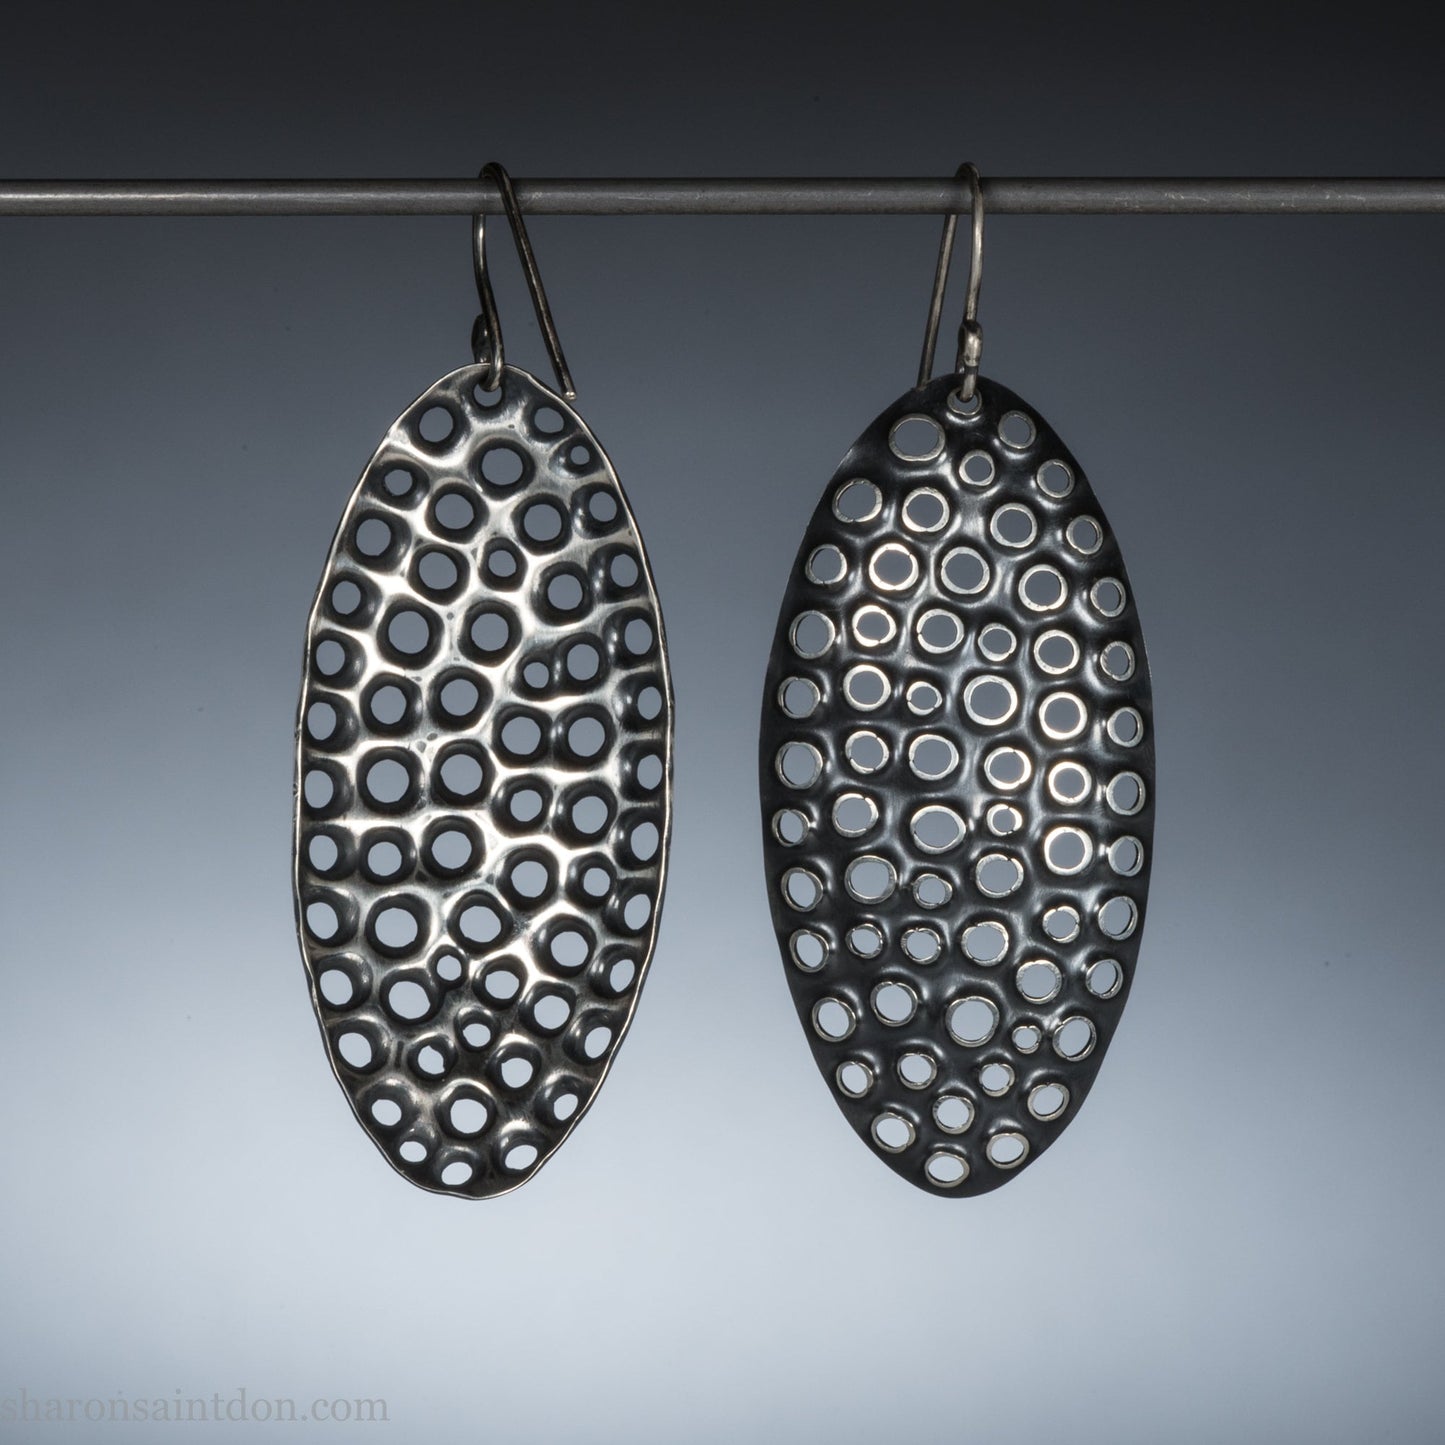 925 sterling silver handmade earrings for women. Comfortable, light, oval dangle earrings with mesh dots and ear wire hooks.